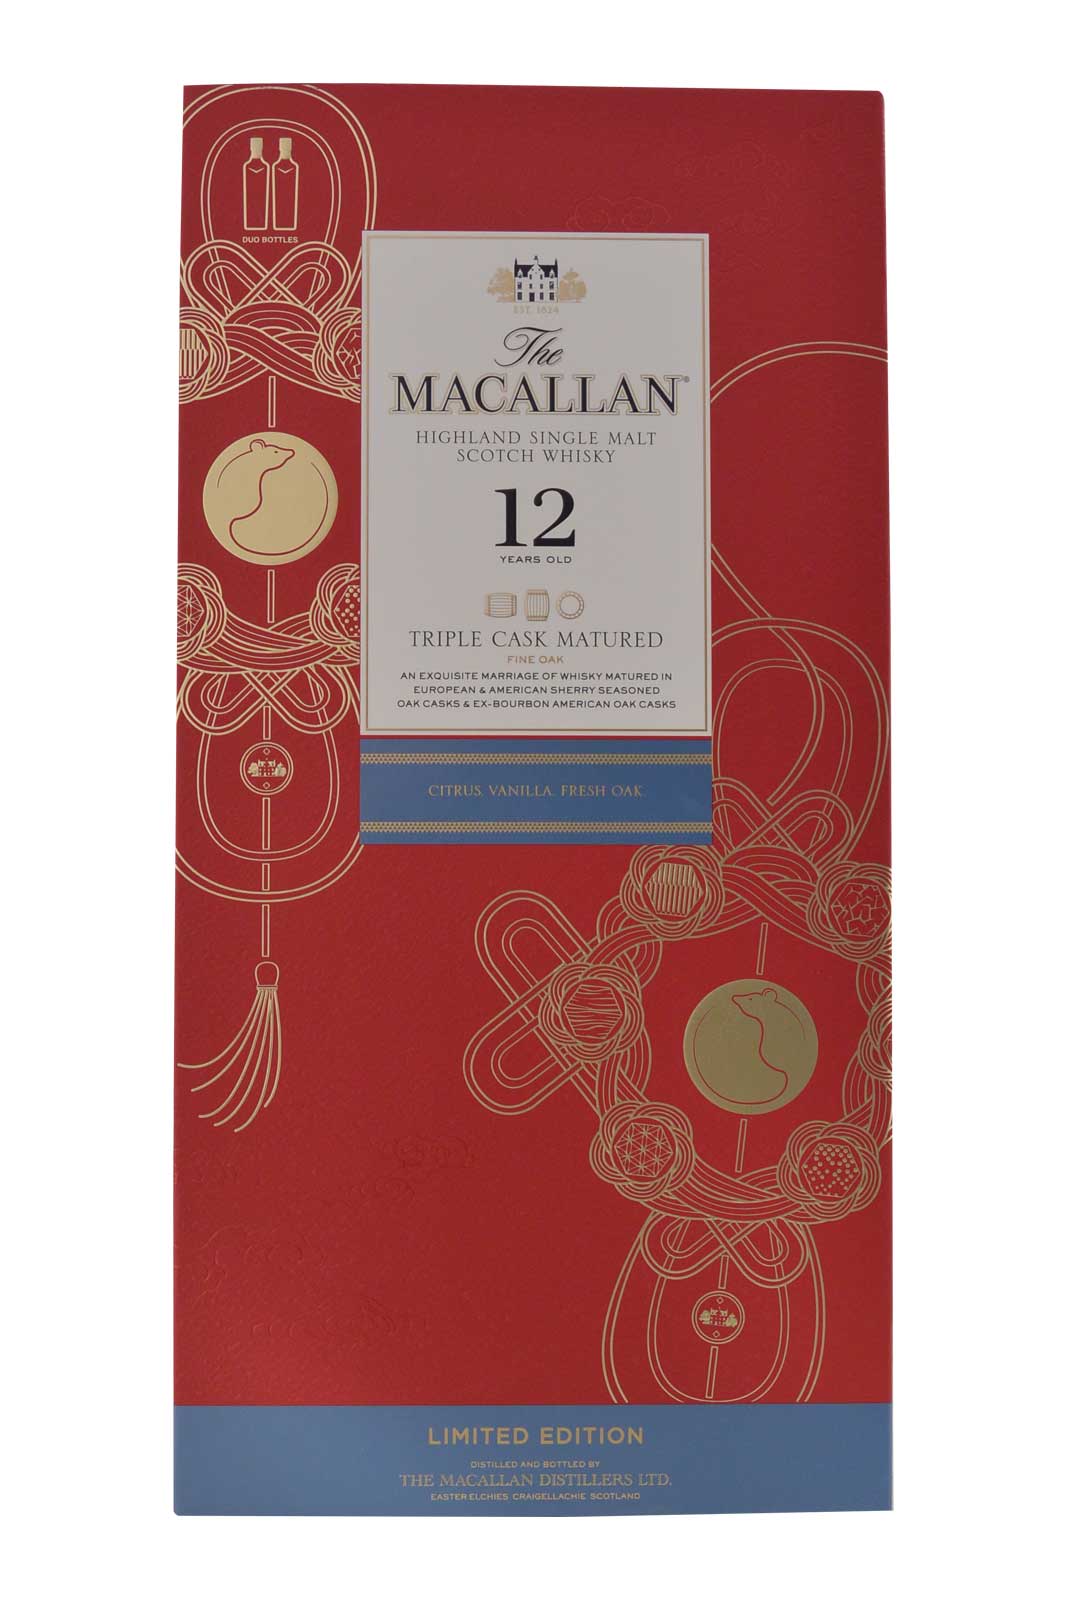 The Macallan 12 Year Old Triple Cask (Limited Edition 2 bottles in a box)